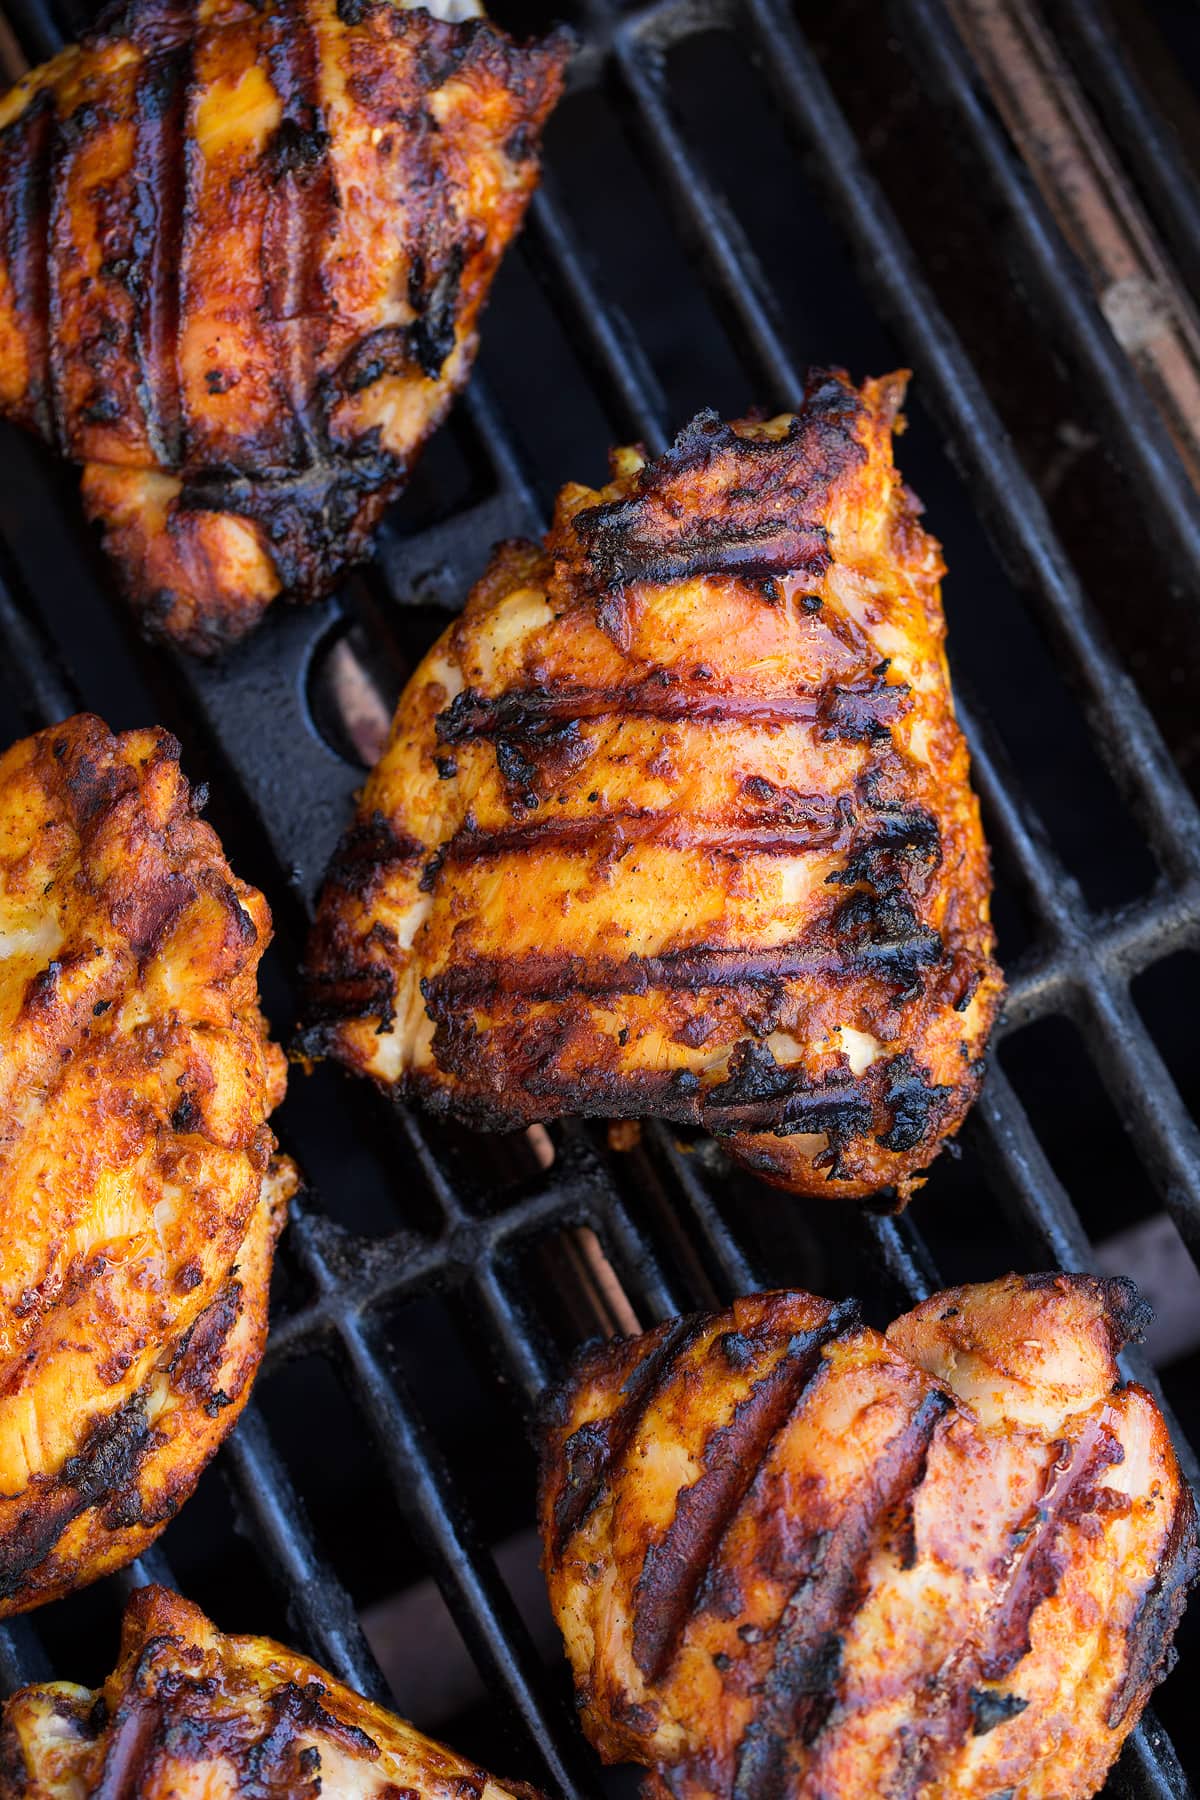 5 pieces of Tandoori Chicken shown on a grill.